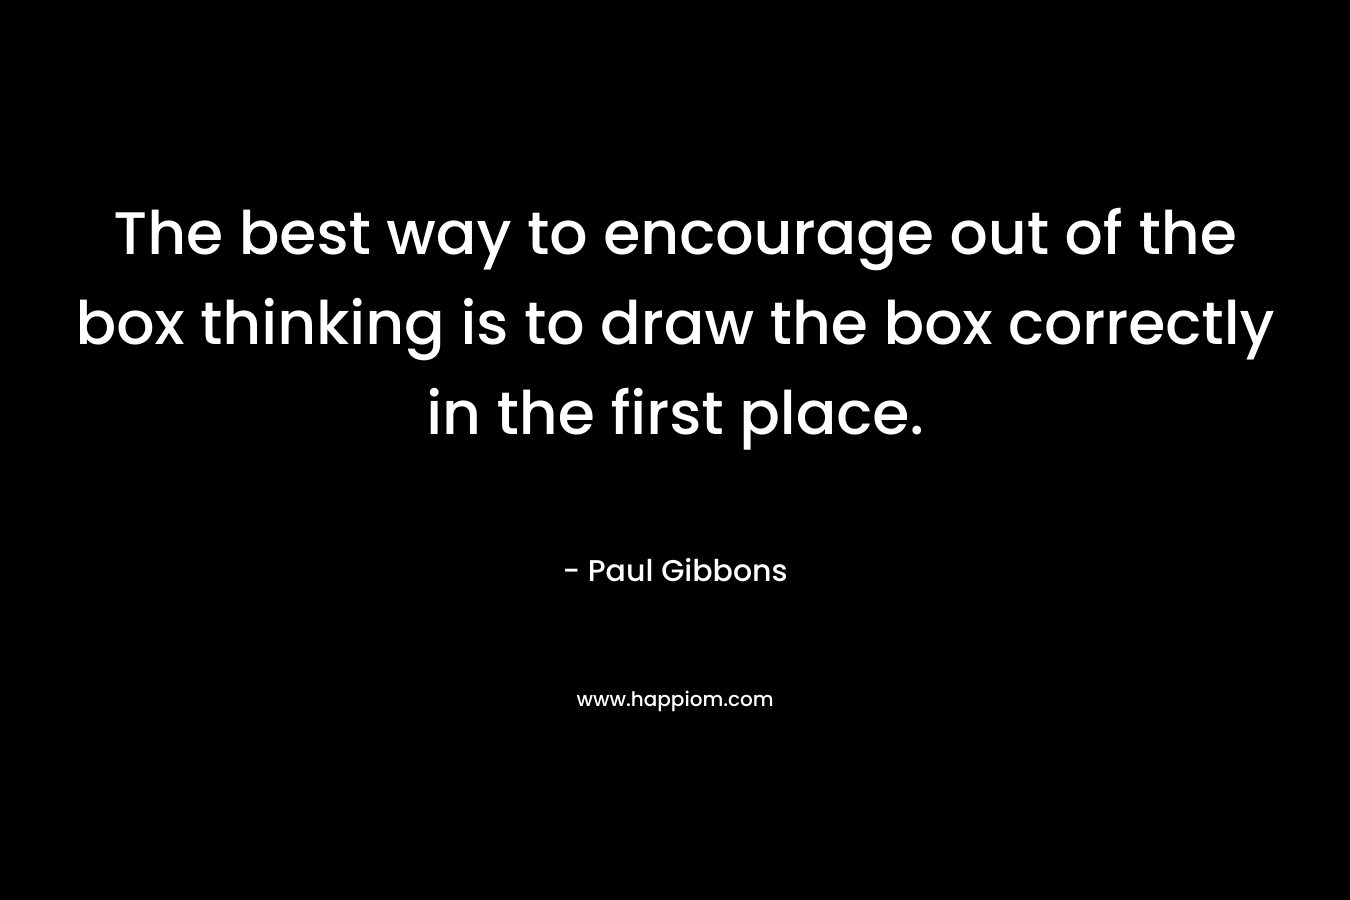 The best way to encourage out of the box thinking is to draw the box correctly in the first place. – Paul Gibbons